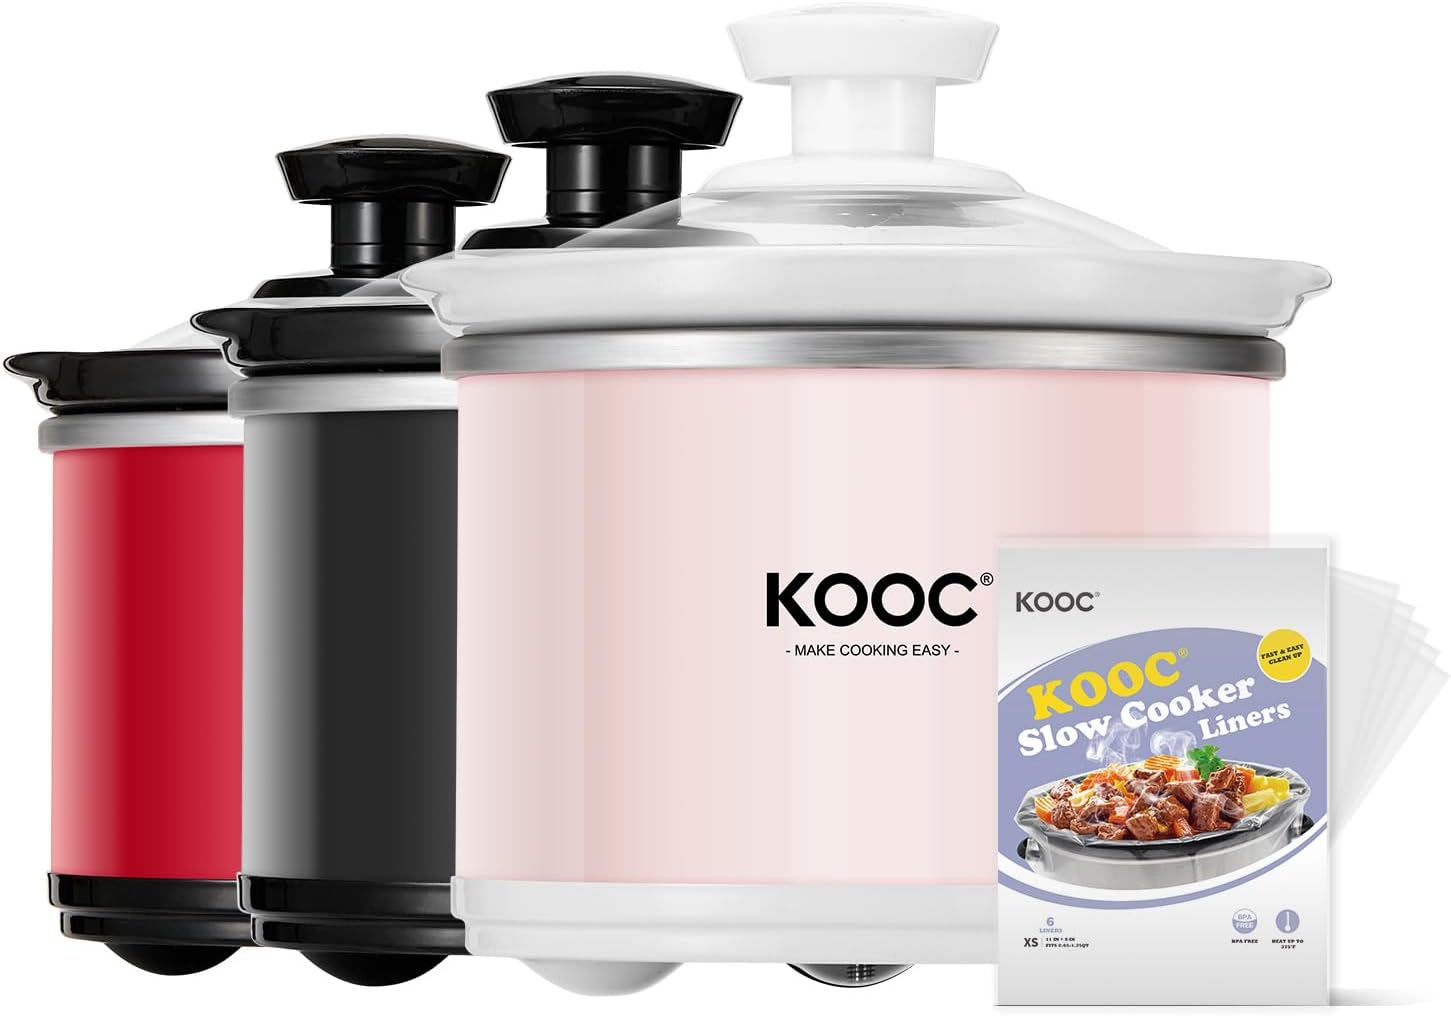 KOOC Small Slow Cooker, 0.65-Quart, Free Liners Included, Upgraded Ceramic Pot, Nutrient Loss Reduction, Sauces, Stews  Dips, Stainless Steel, Pink, Round